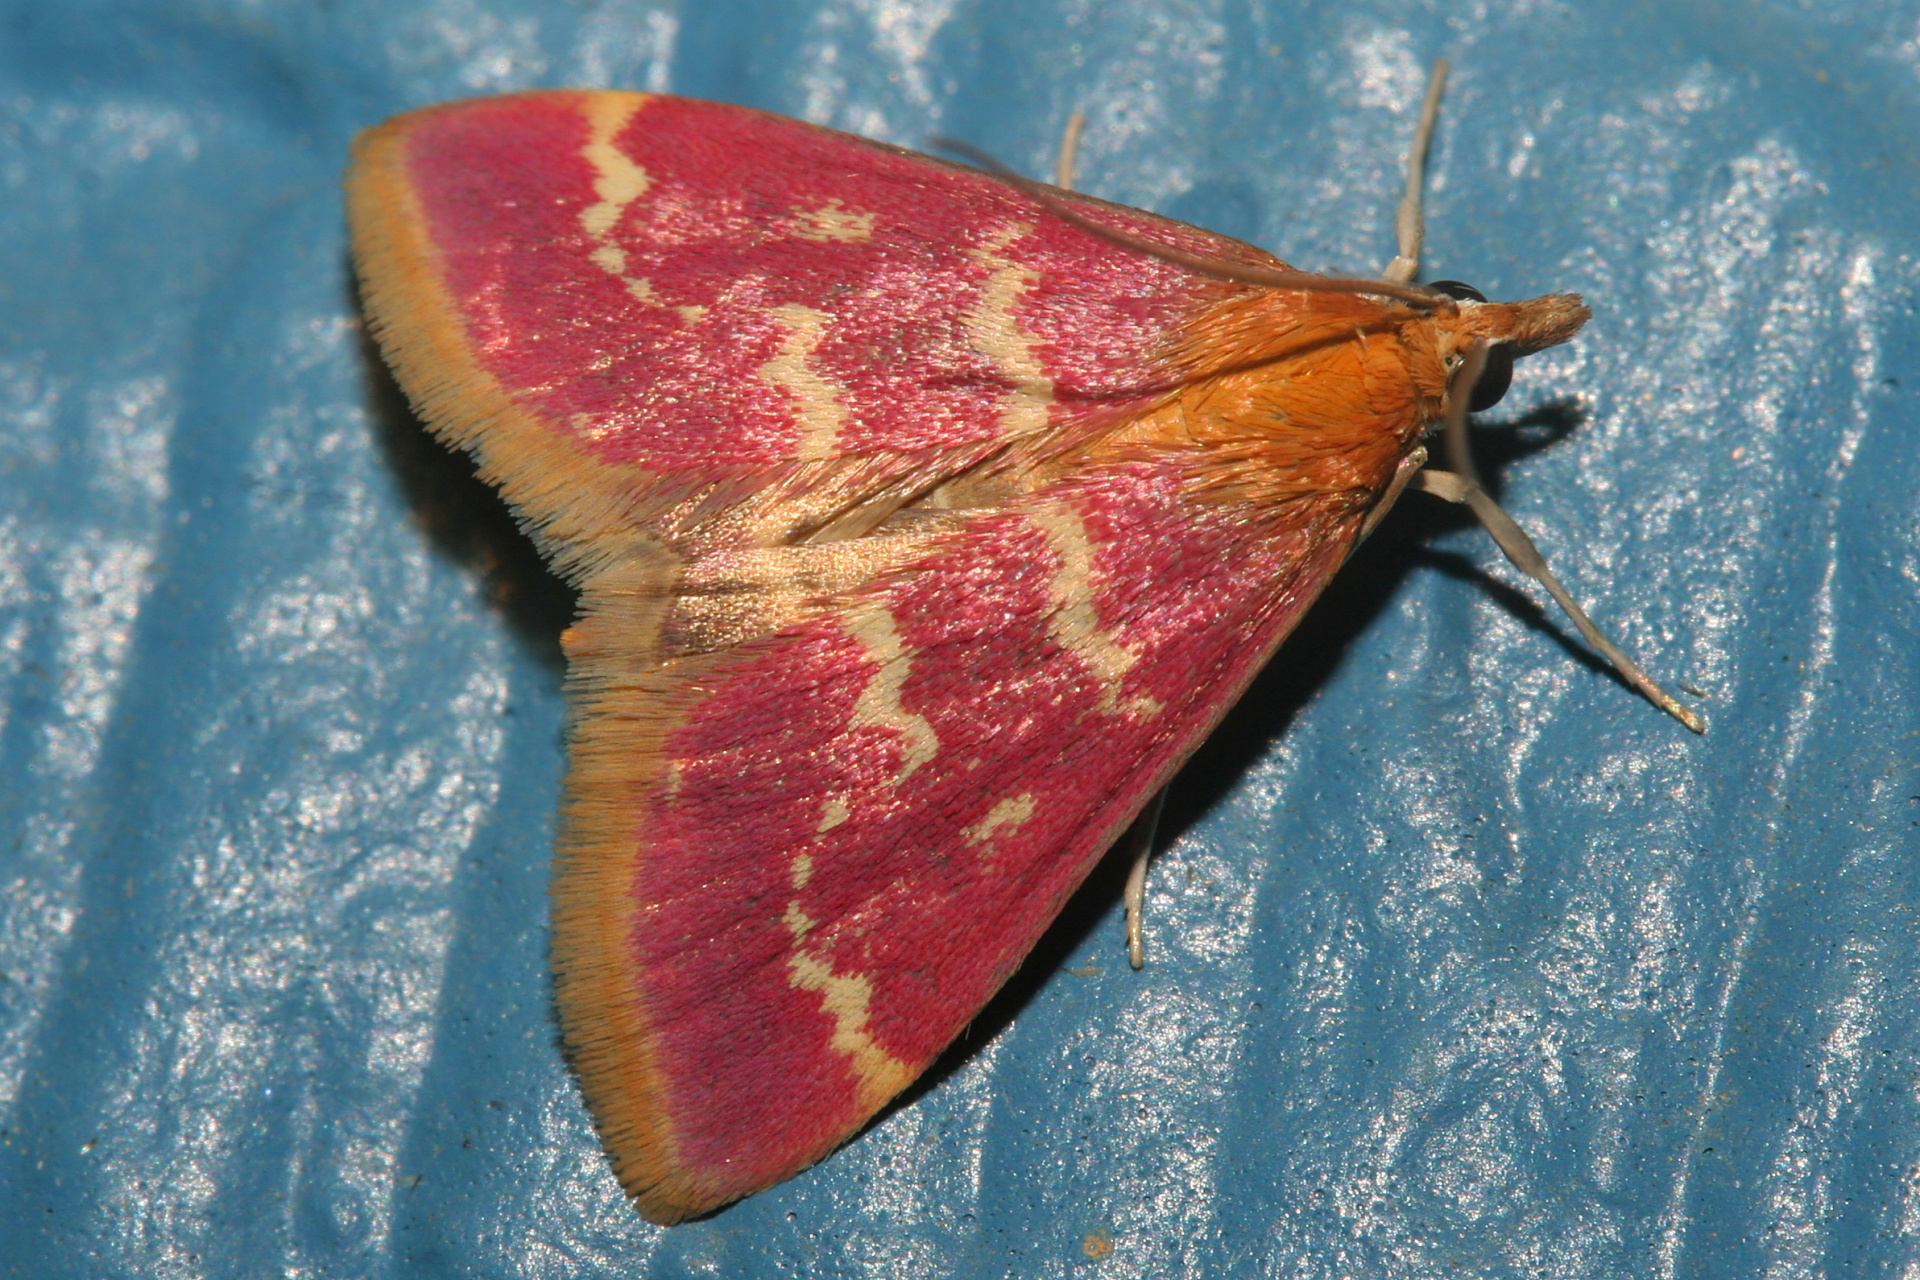 Pyrausta signatalis (Travels » US Trip 2: Cheyenne Epic » Animals » Insects » Butterfies and Moths » Crambidae)